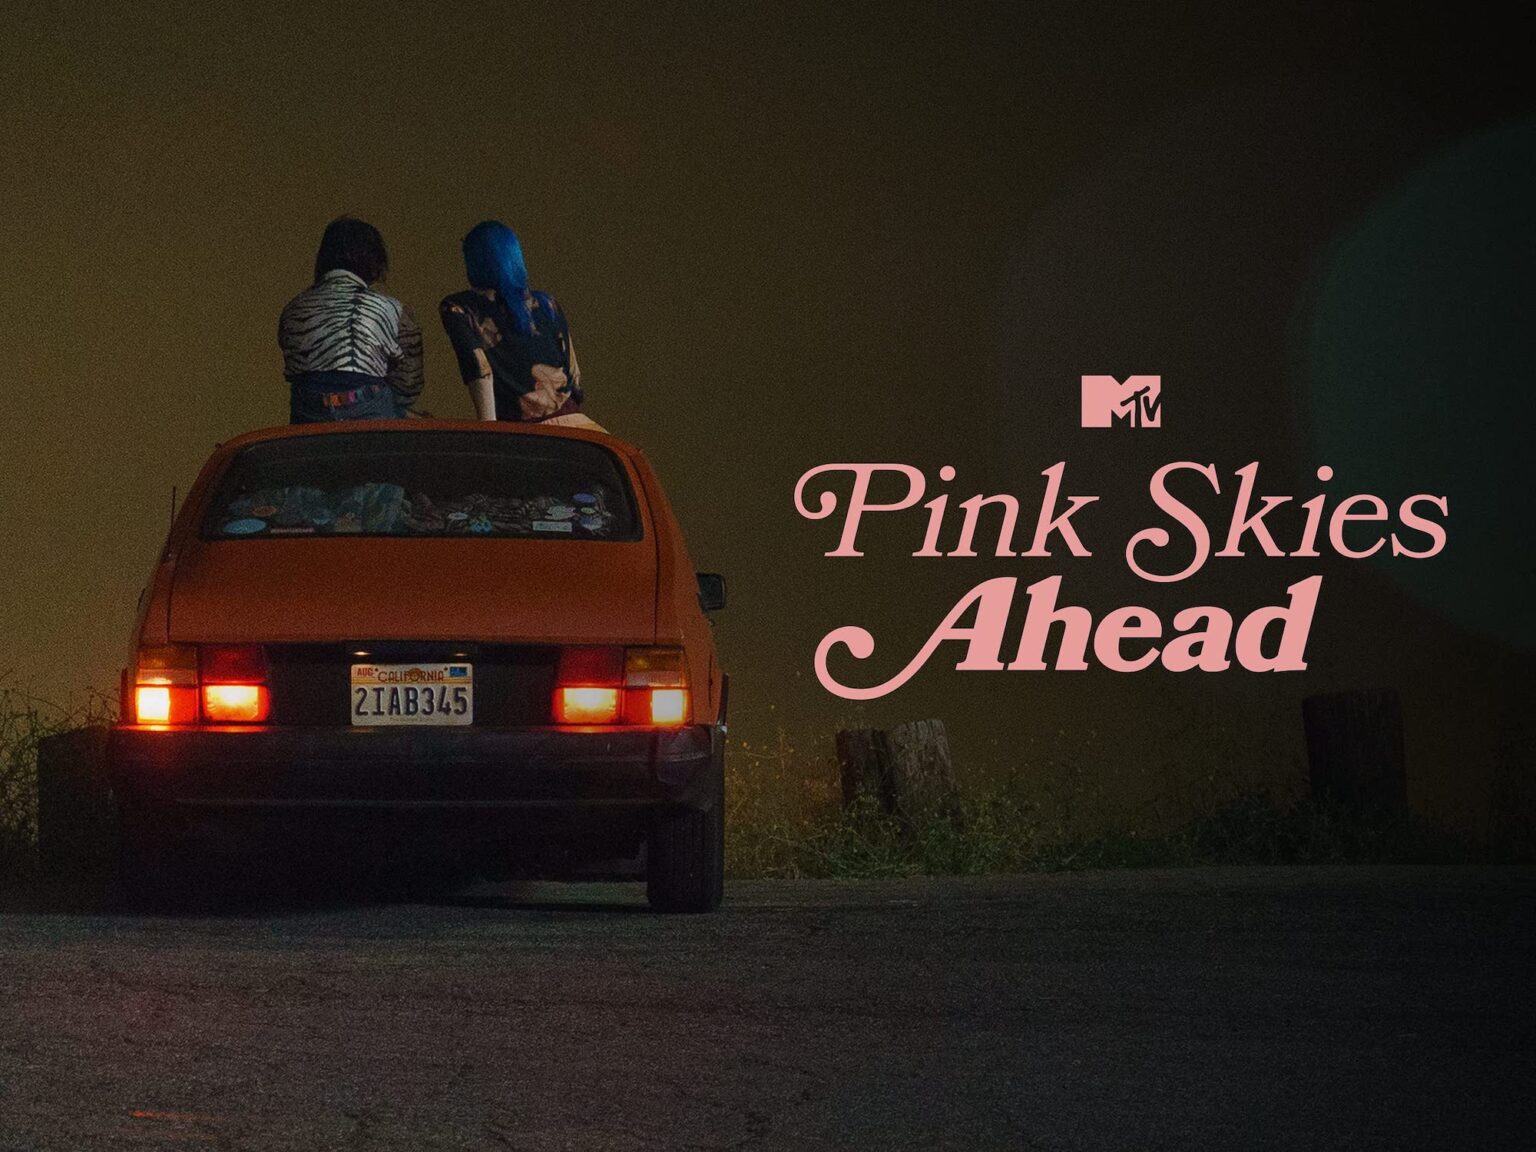 'Pink Skies Ahead' was one of the most impressive debut films to come out of 2020. Take a nostalgia trip and explore some deeper themes with the movie.